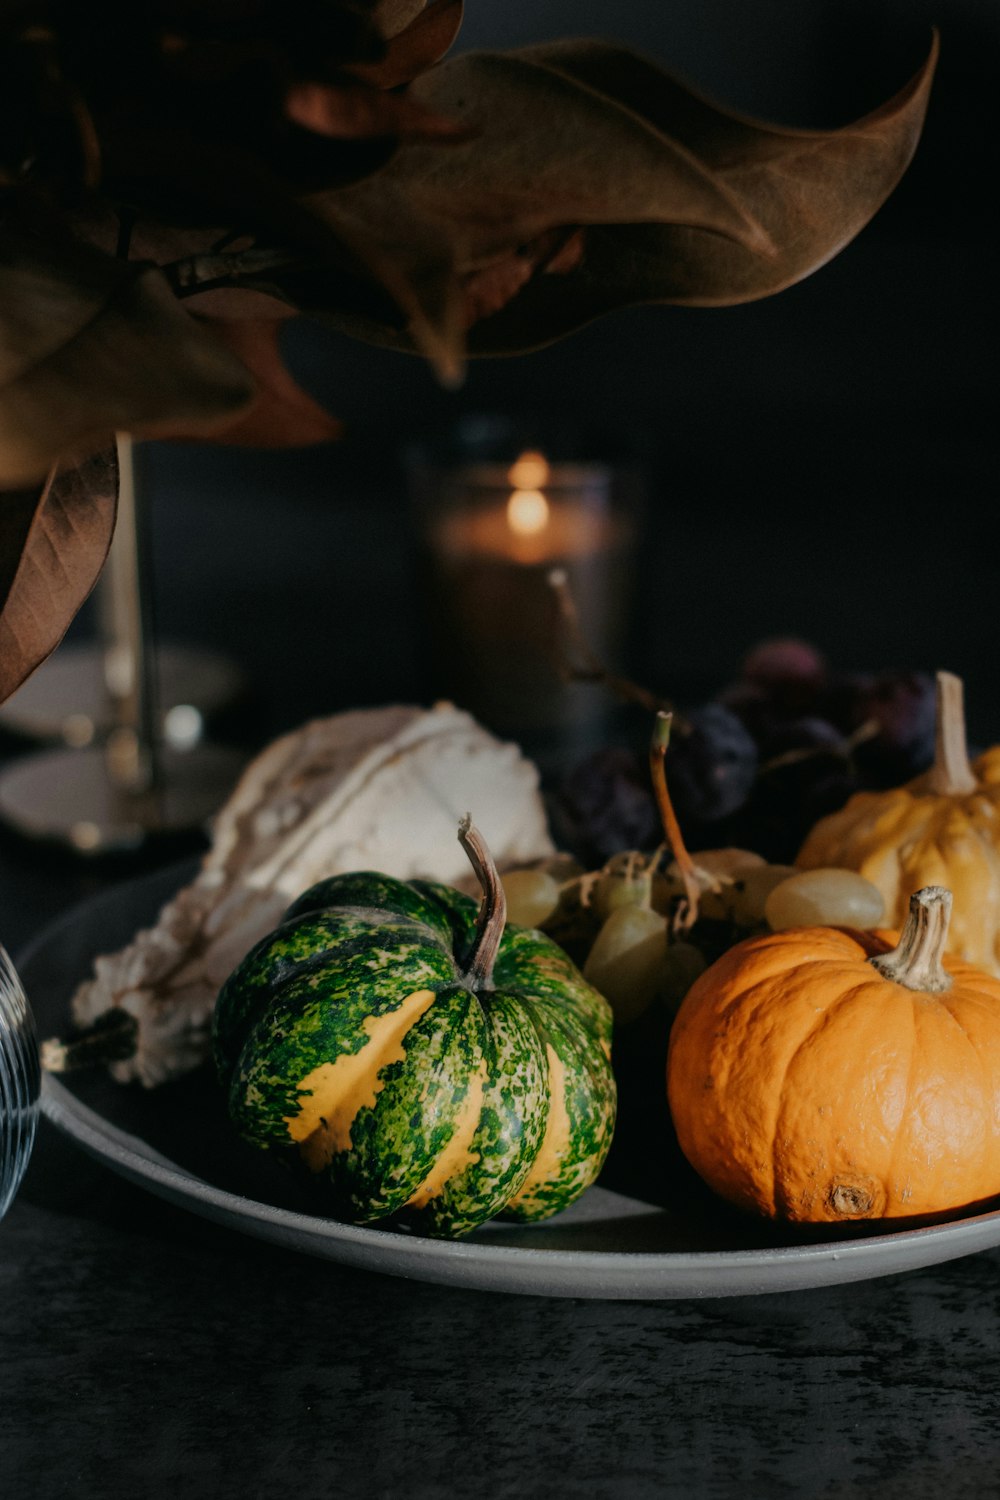 a plate of pumpkins and gourds on a table